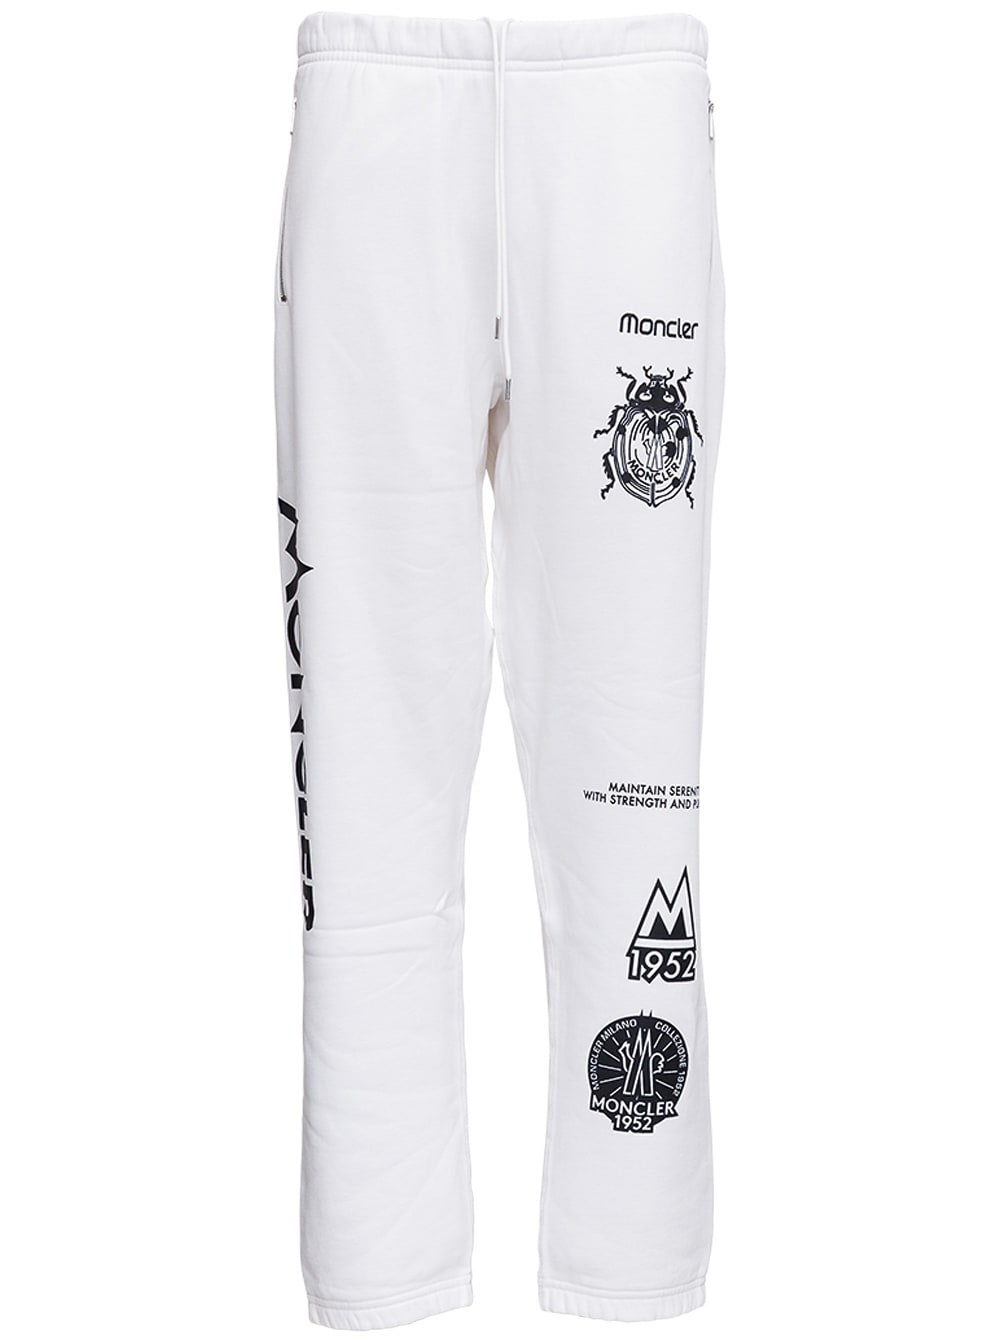 Moncler Genius White Joggers By 1952